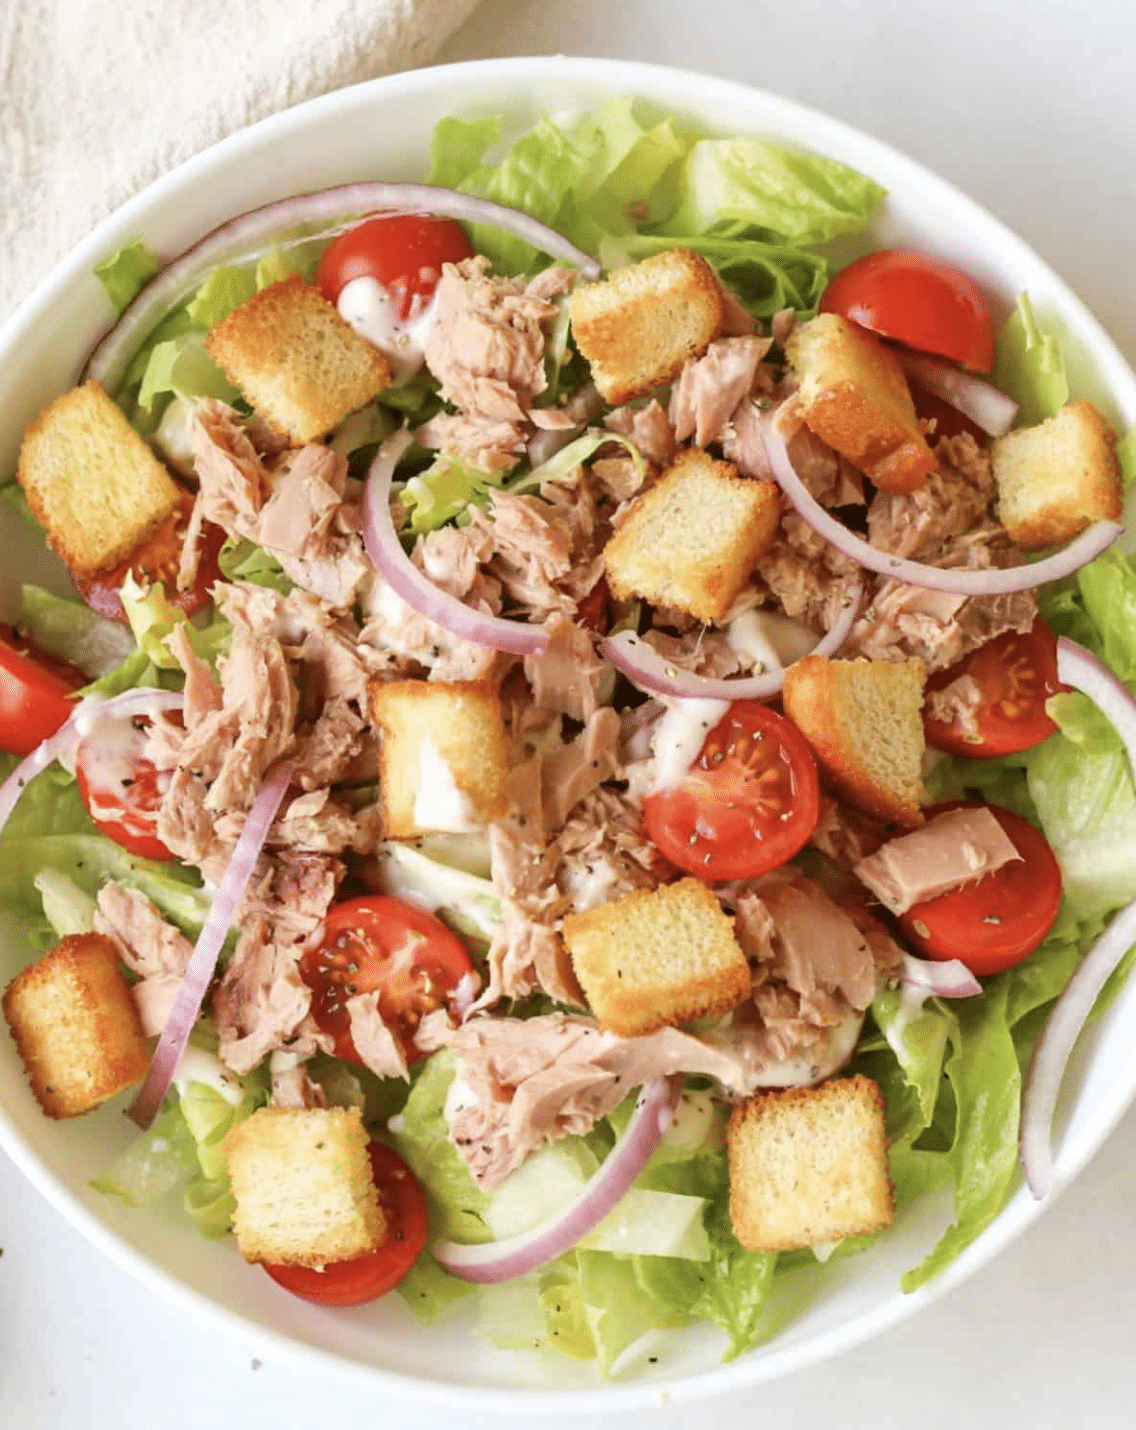 canned tuna on salad with croutons